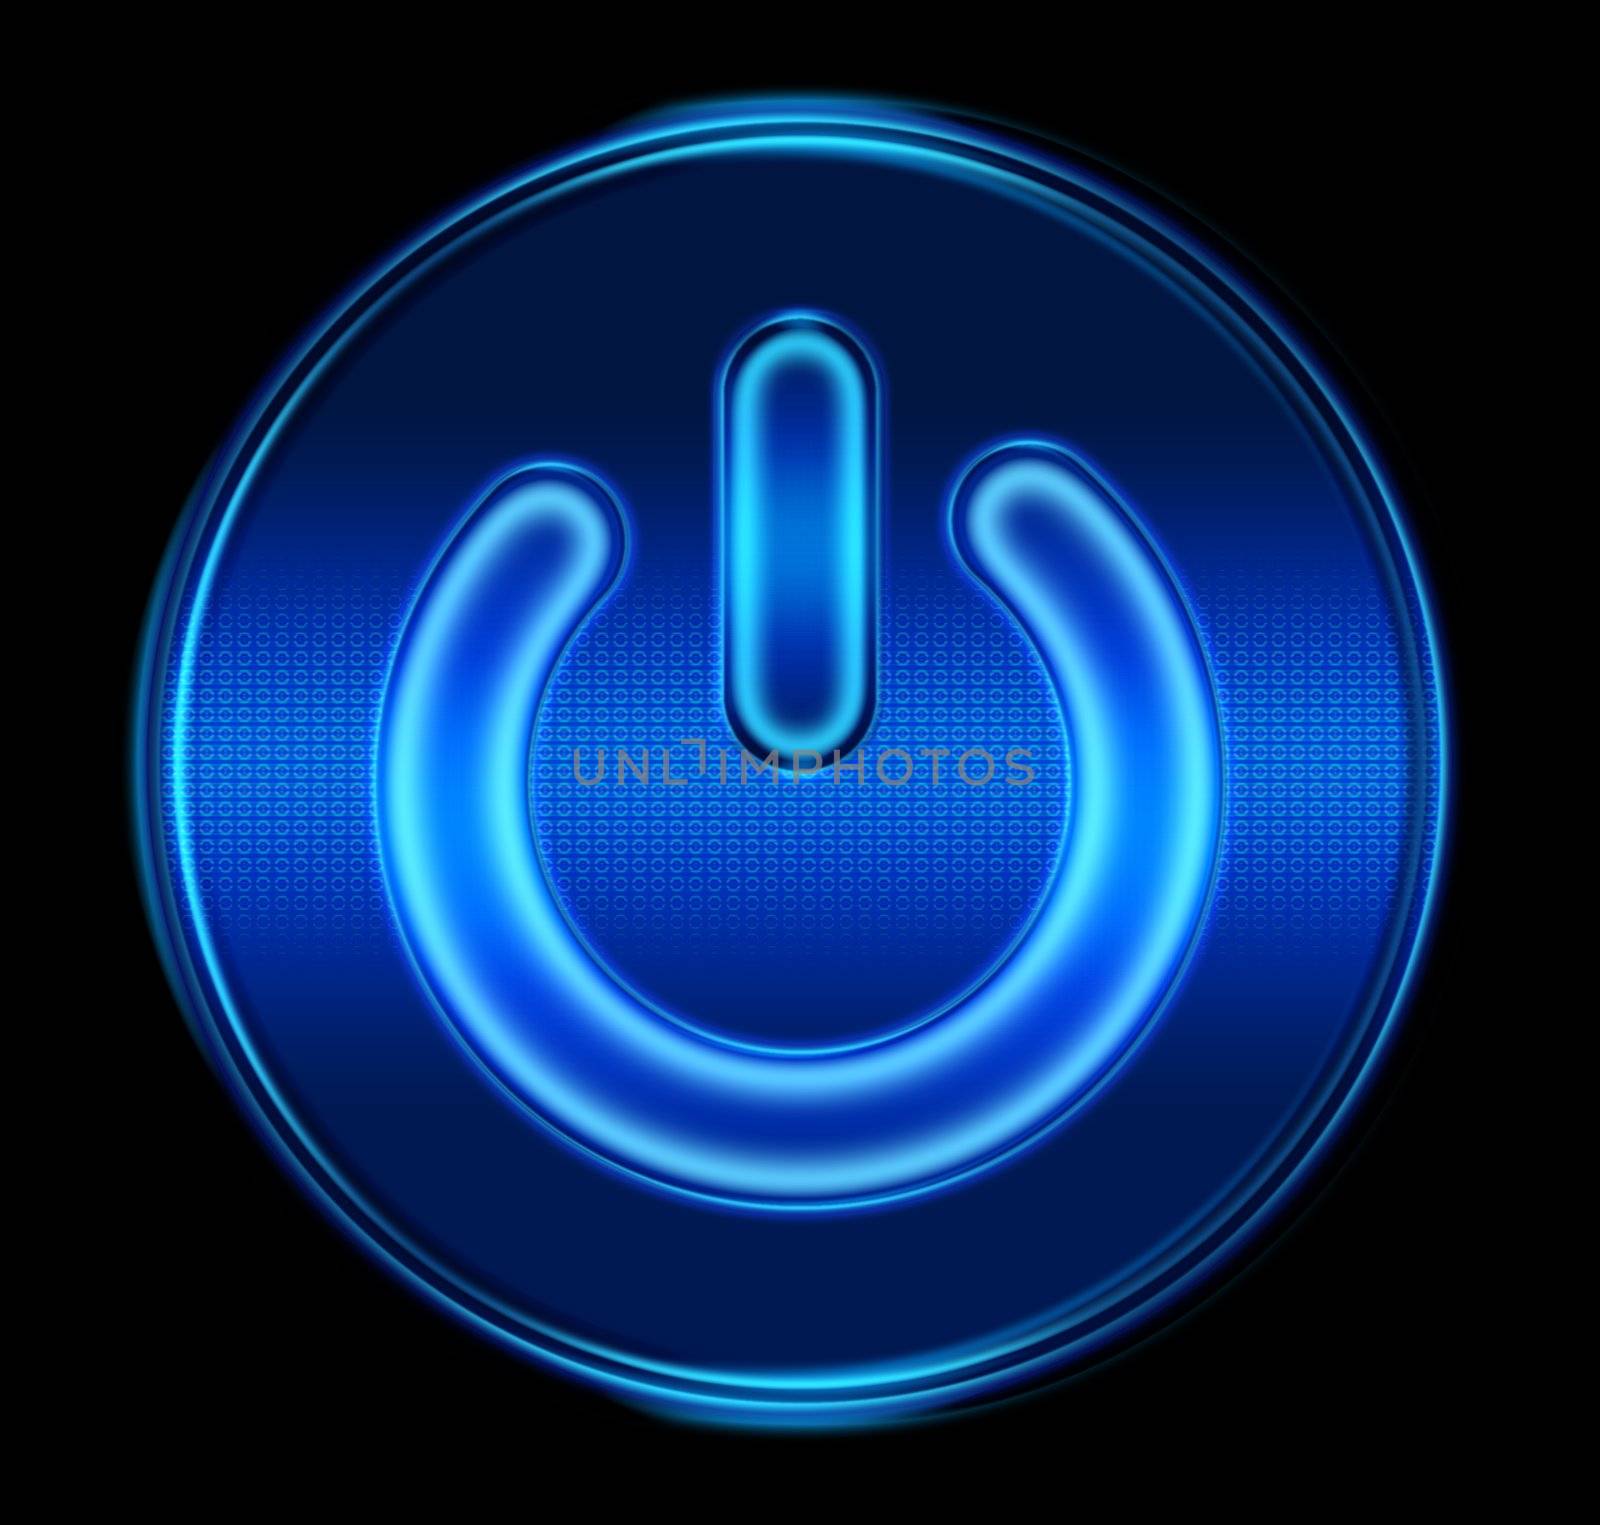 power button icon, isolated on black background